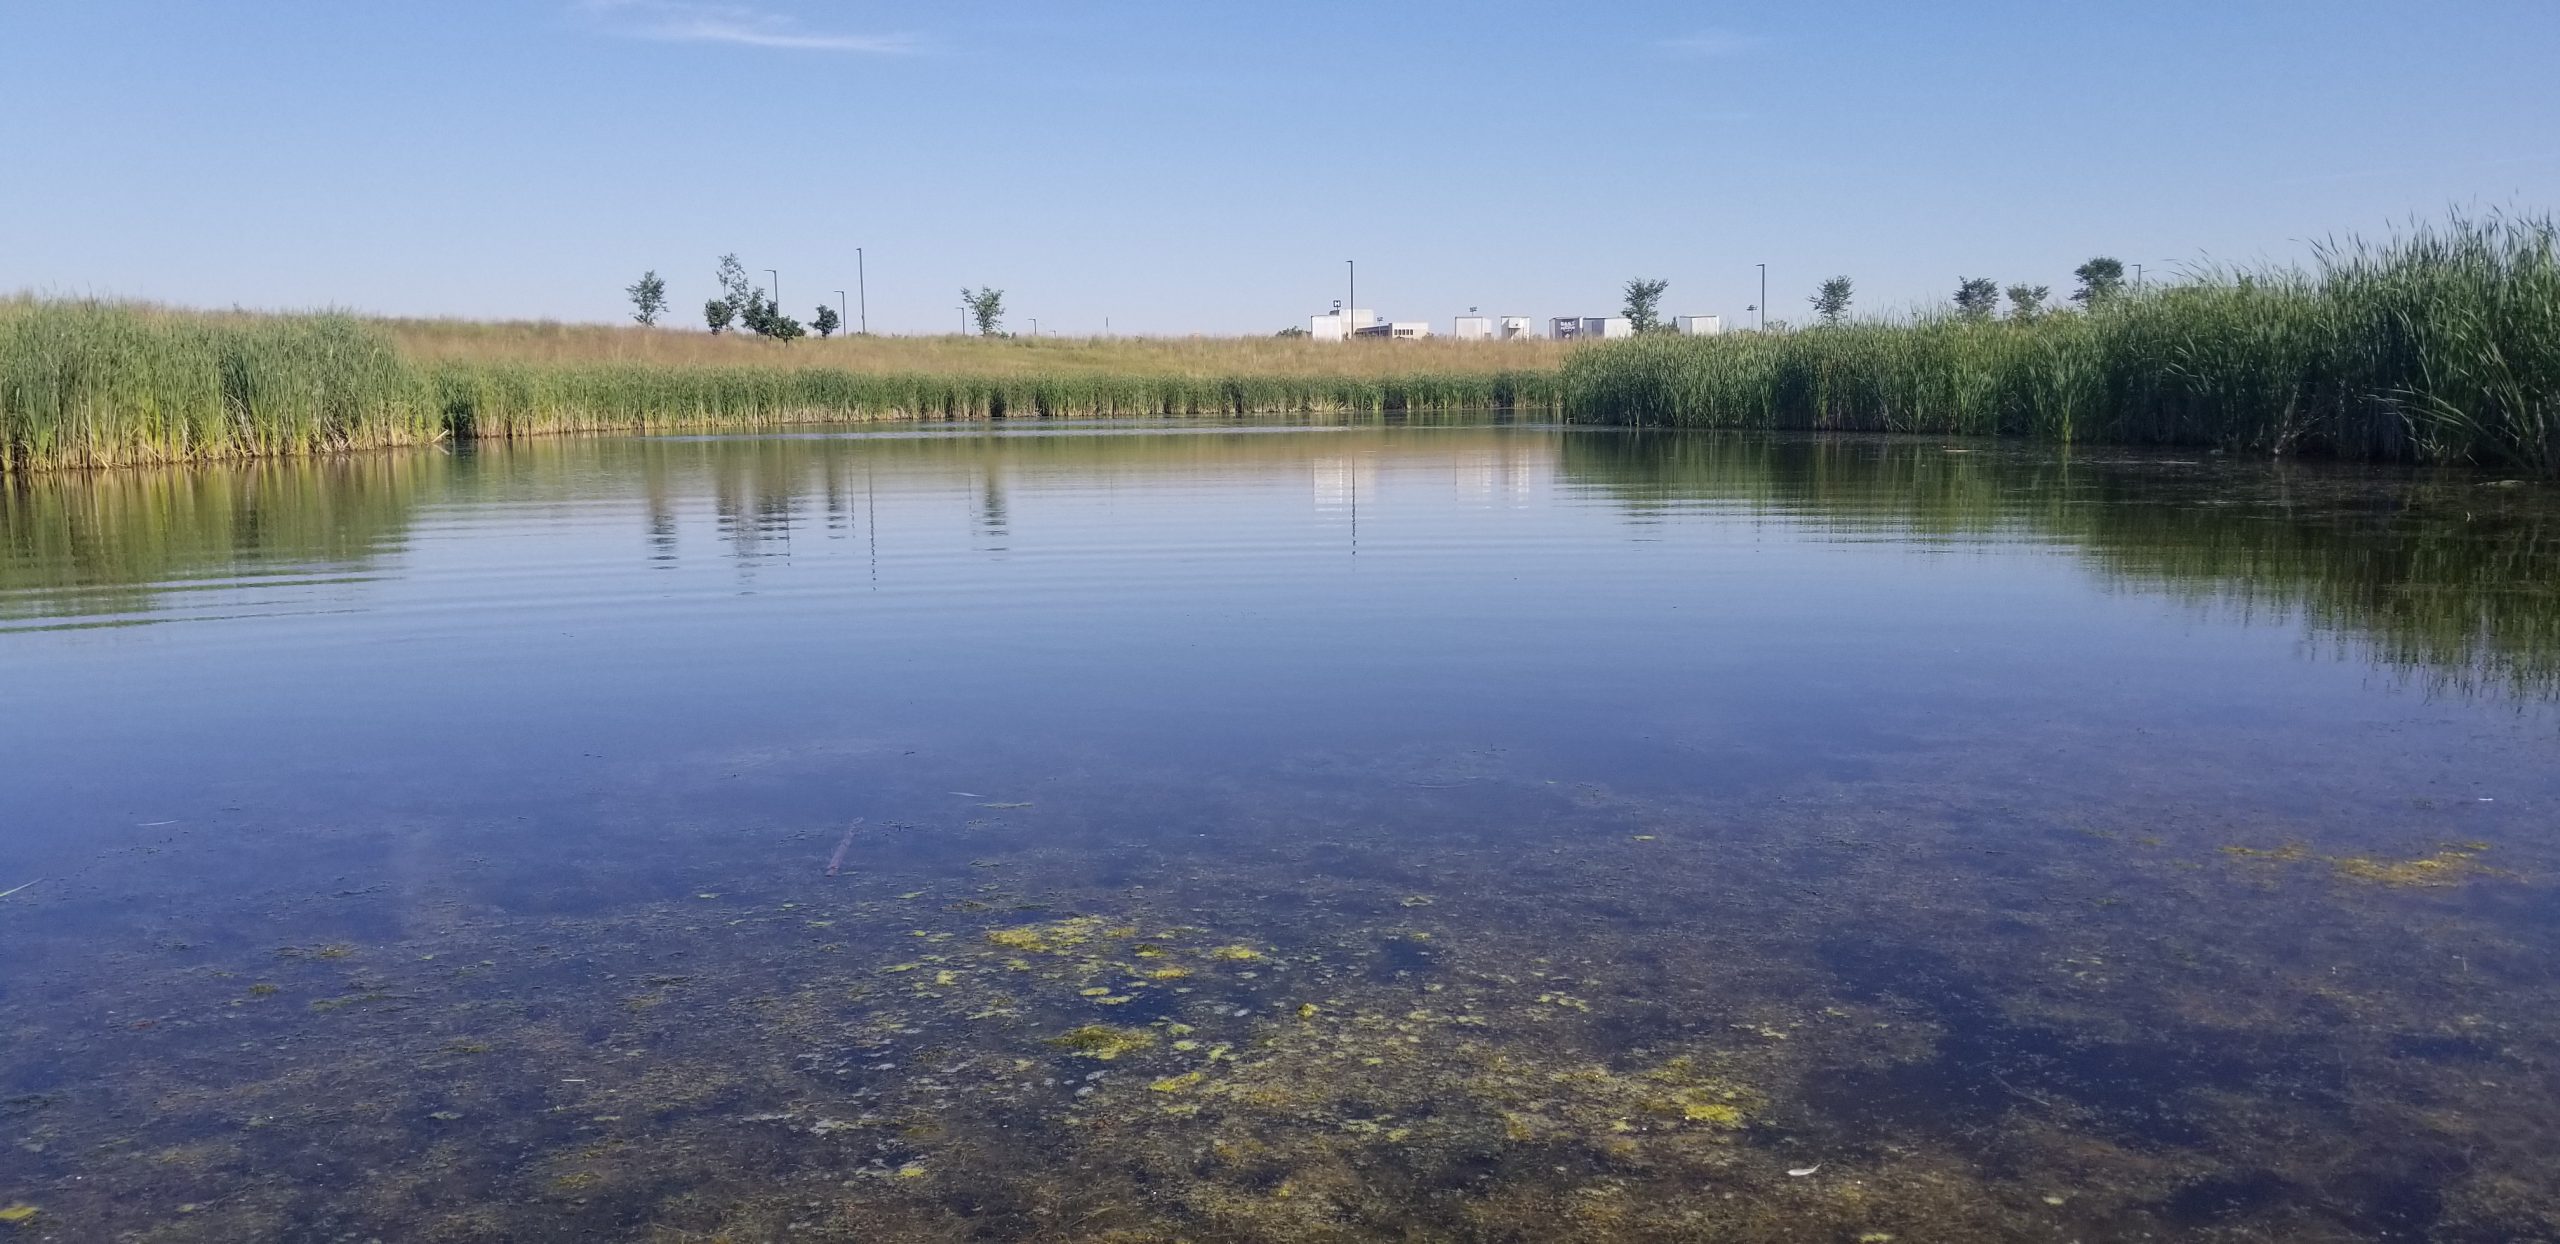 Stories from the Field: Water quality sampling at the UM stormwater retention SmartPond - UM Today